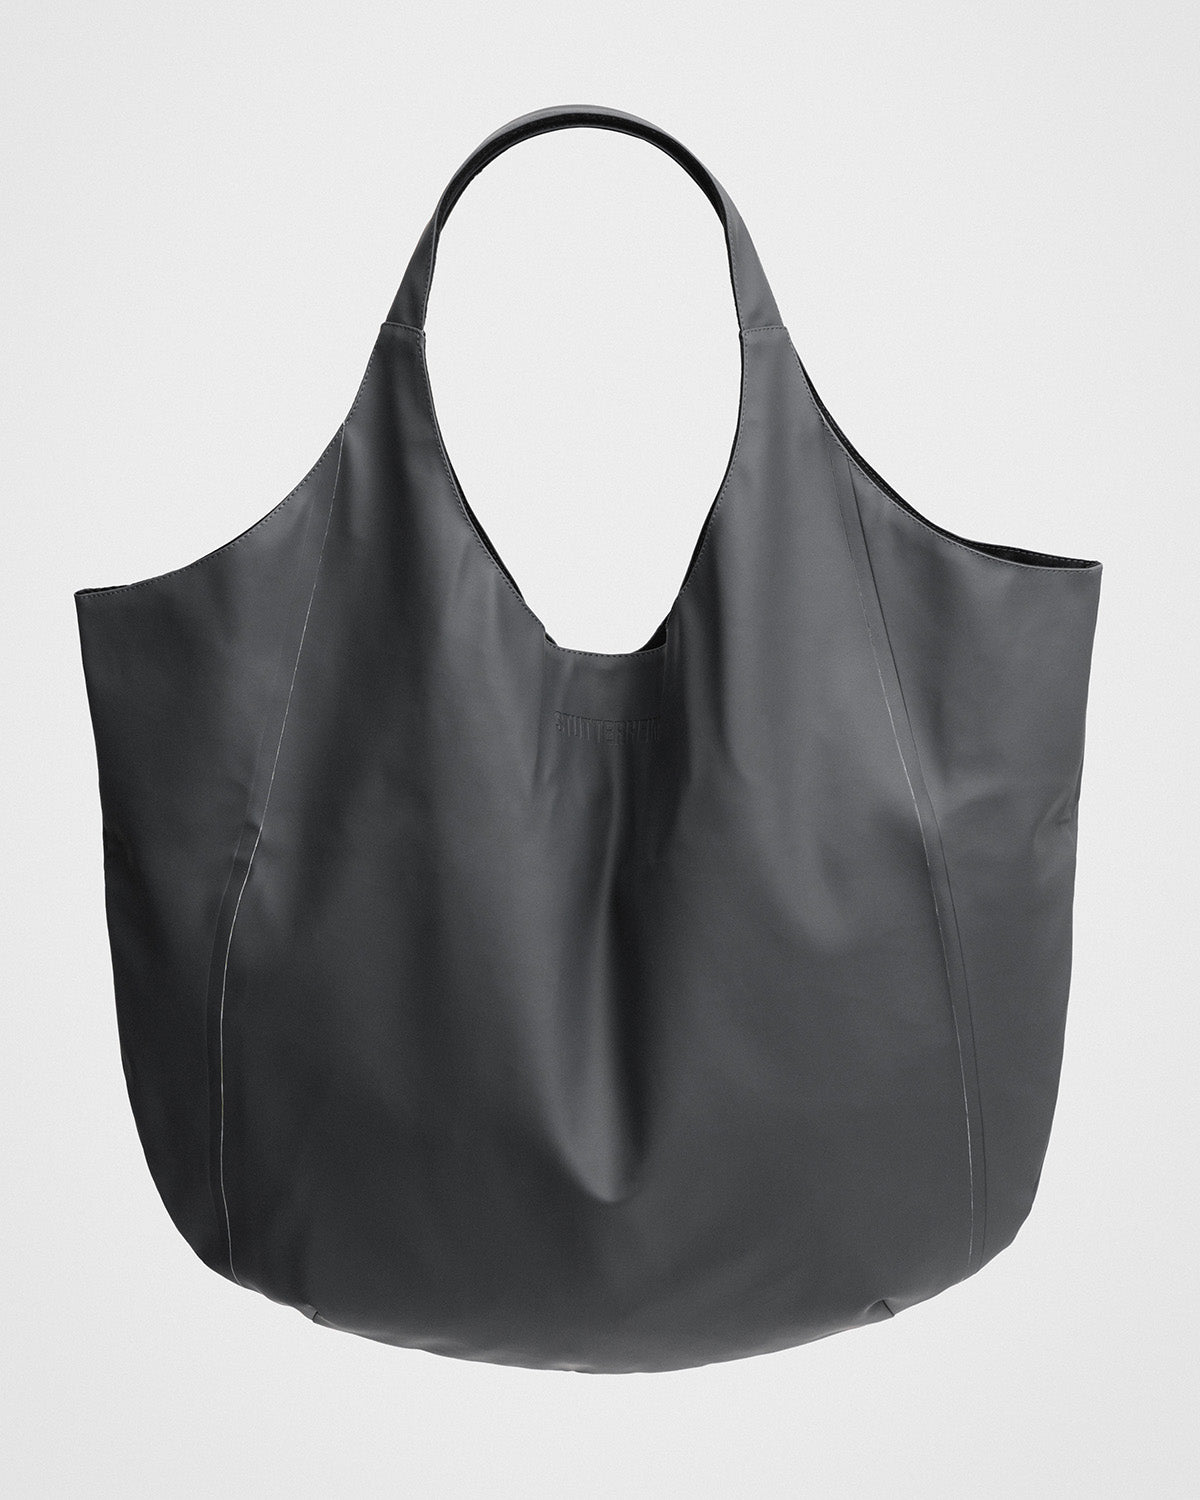 Tote Bag in color charcoal by Stutterheim